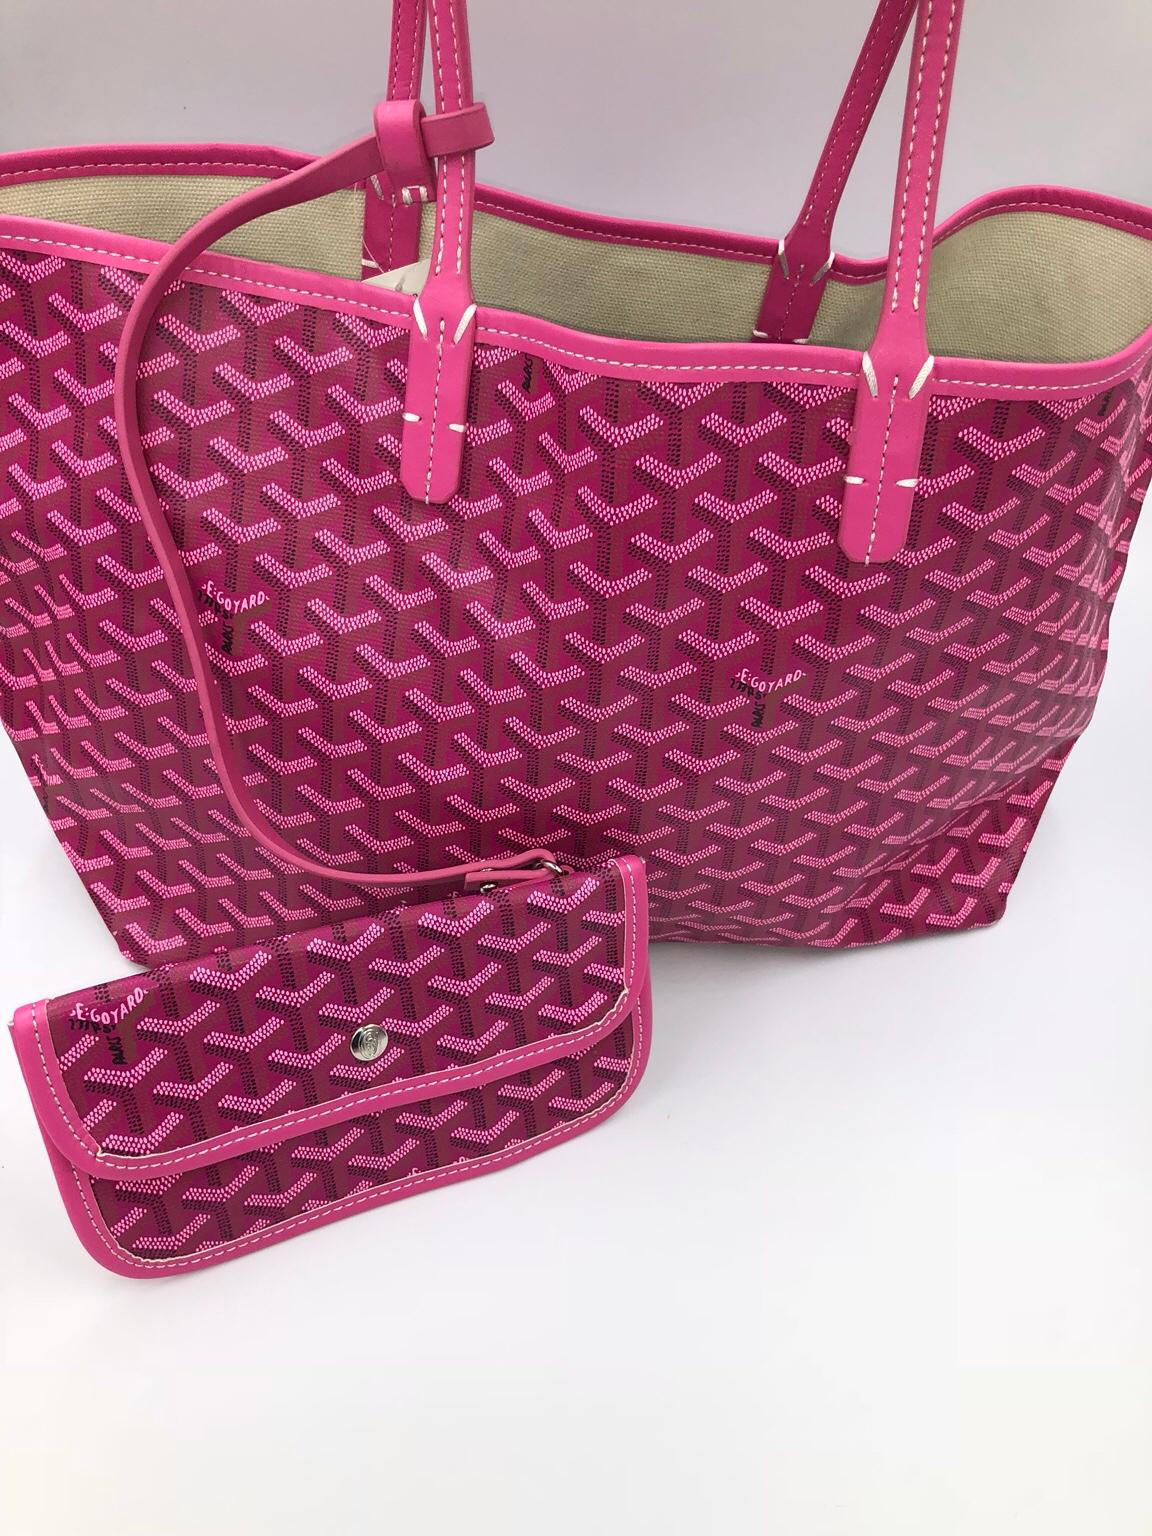 Hot Pink Goyard St Louis jumbo tote bag in SW13 Thames for £50.00 for sale